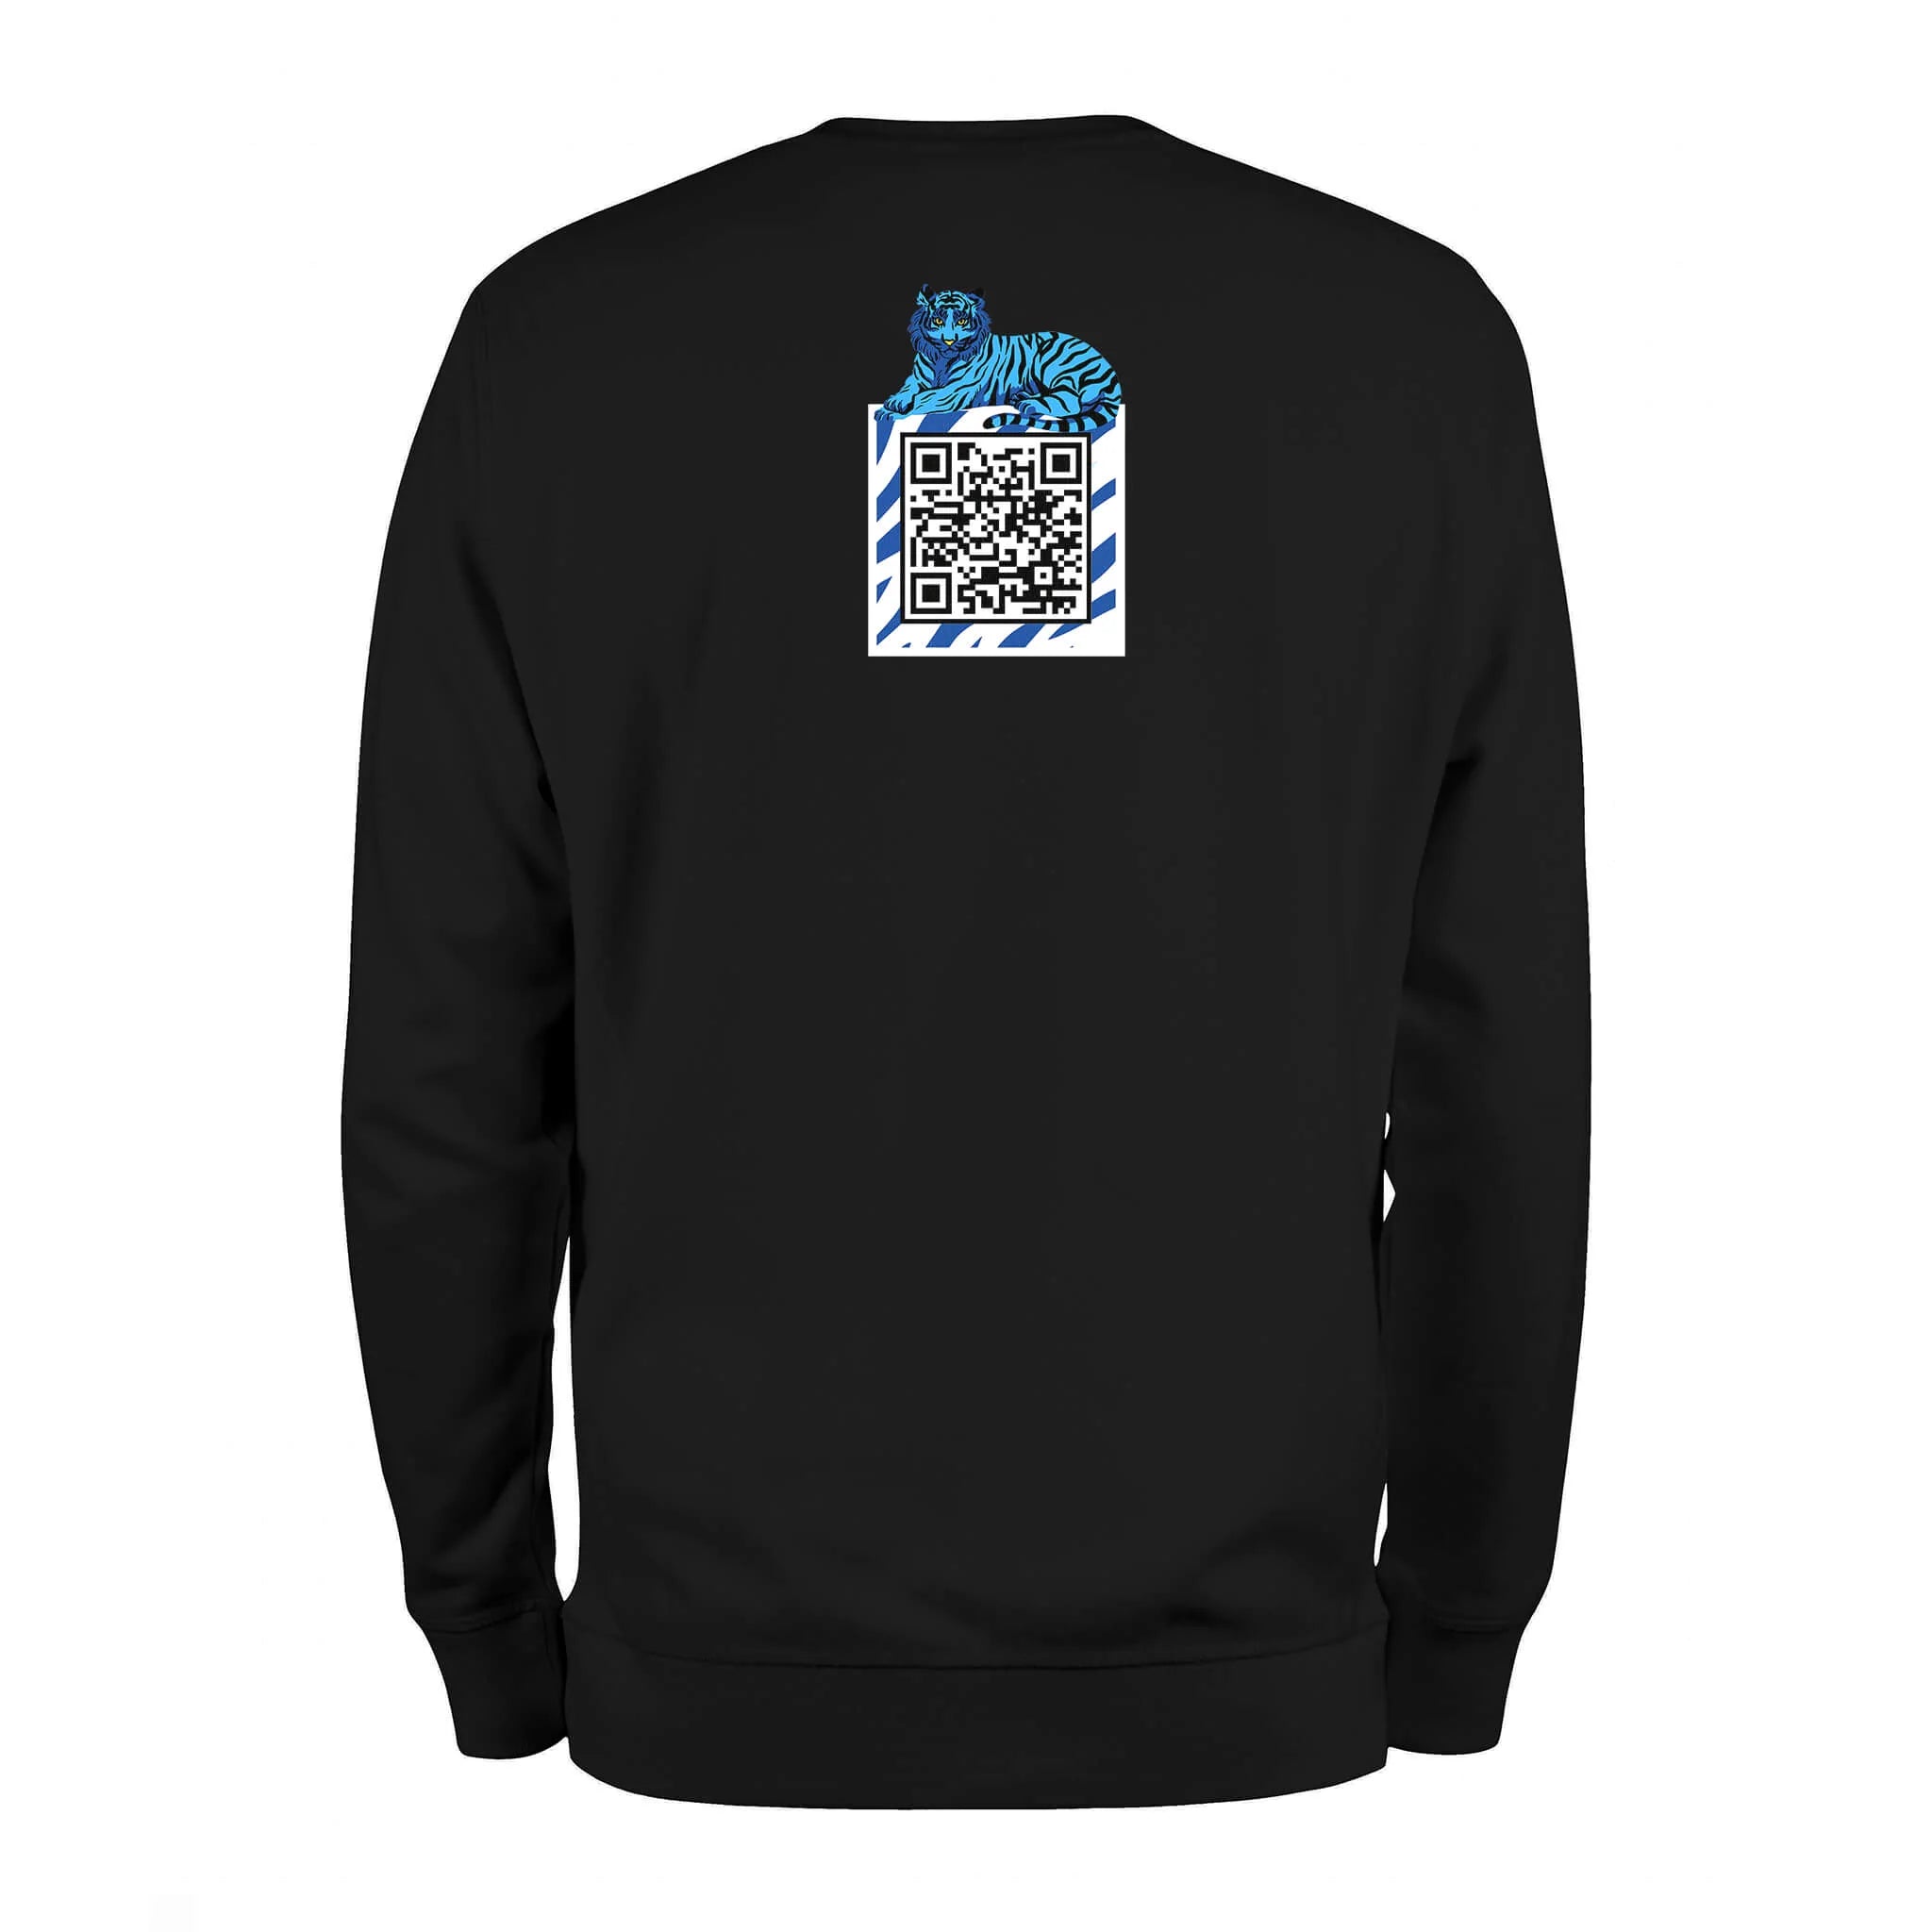 Black QR Sweatshirt from RESHRD Savannah collection with Back White & Navy Blue design